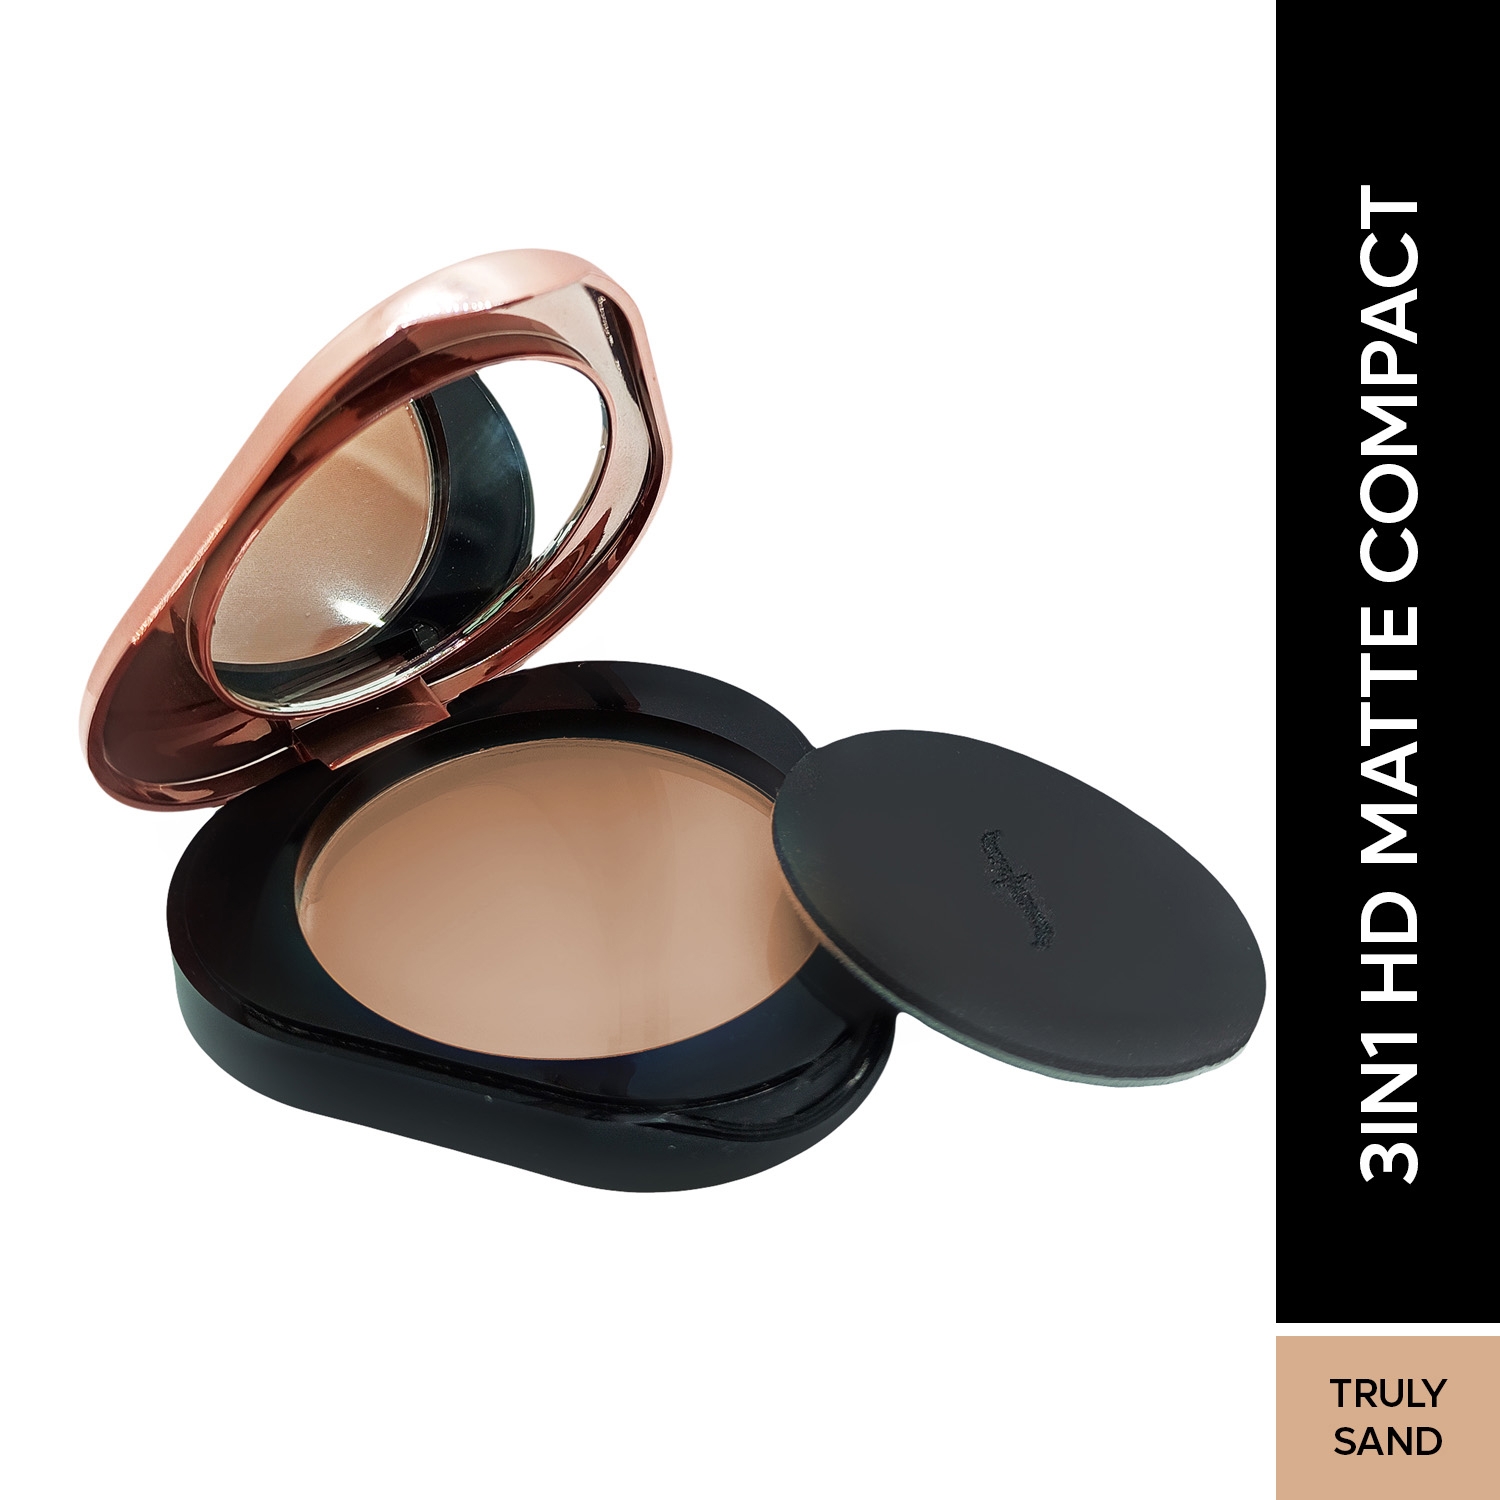 Faces Canada | Faces Canada 3 in 1 HD Matte Compact + Foundation + Hydration - Truly Sand 04 (8g)